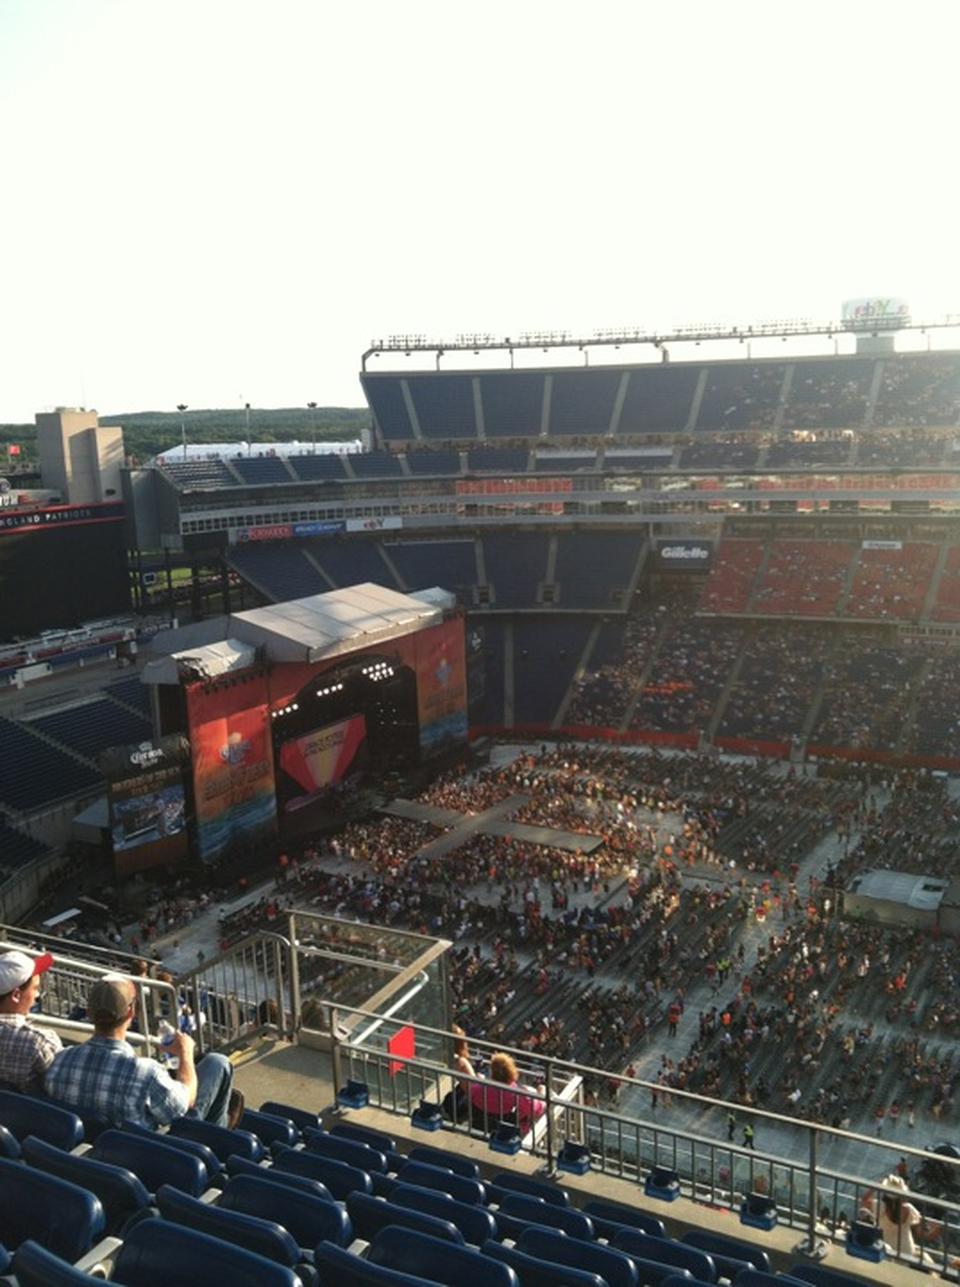 section 309, row 15 seat view  for concert - gillette stadium